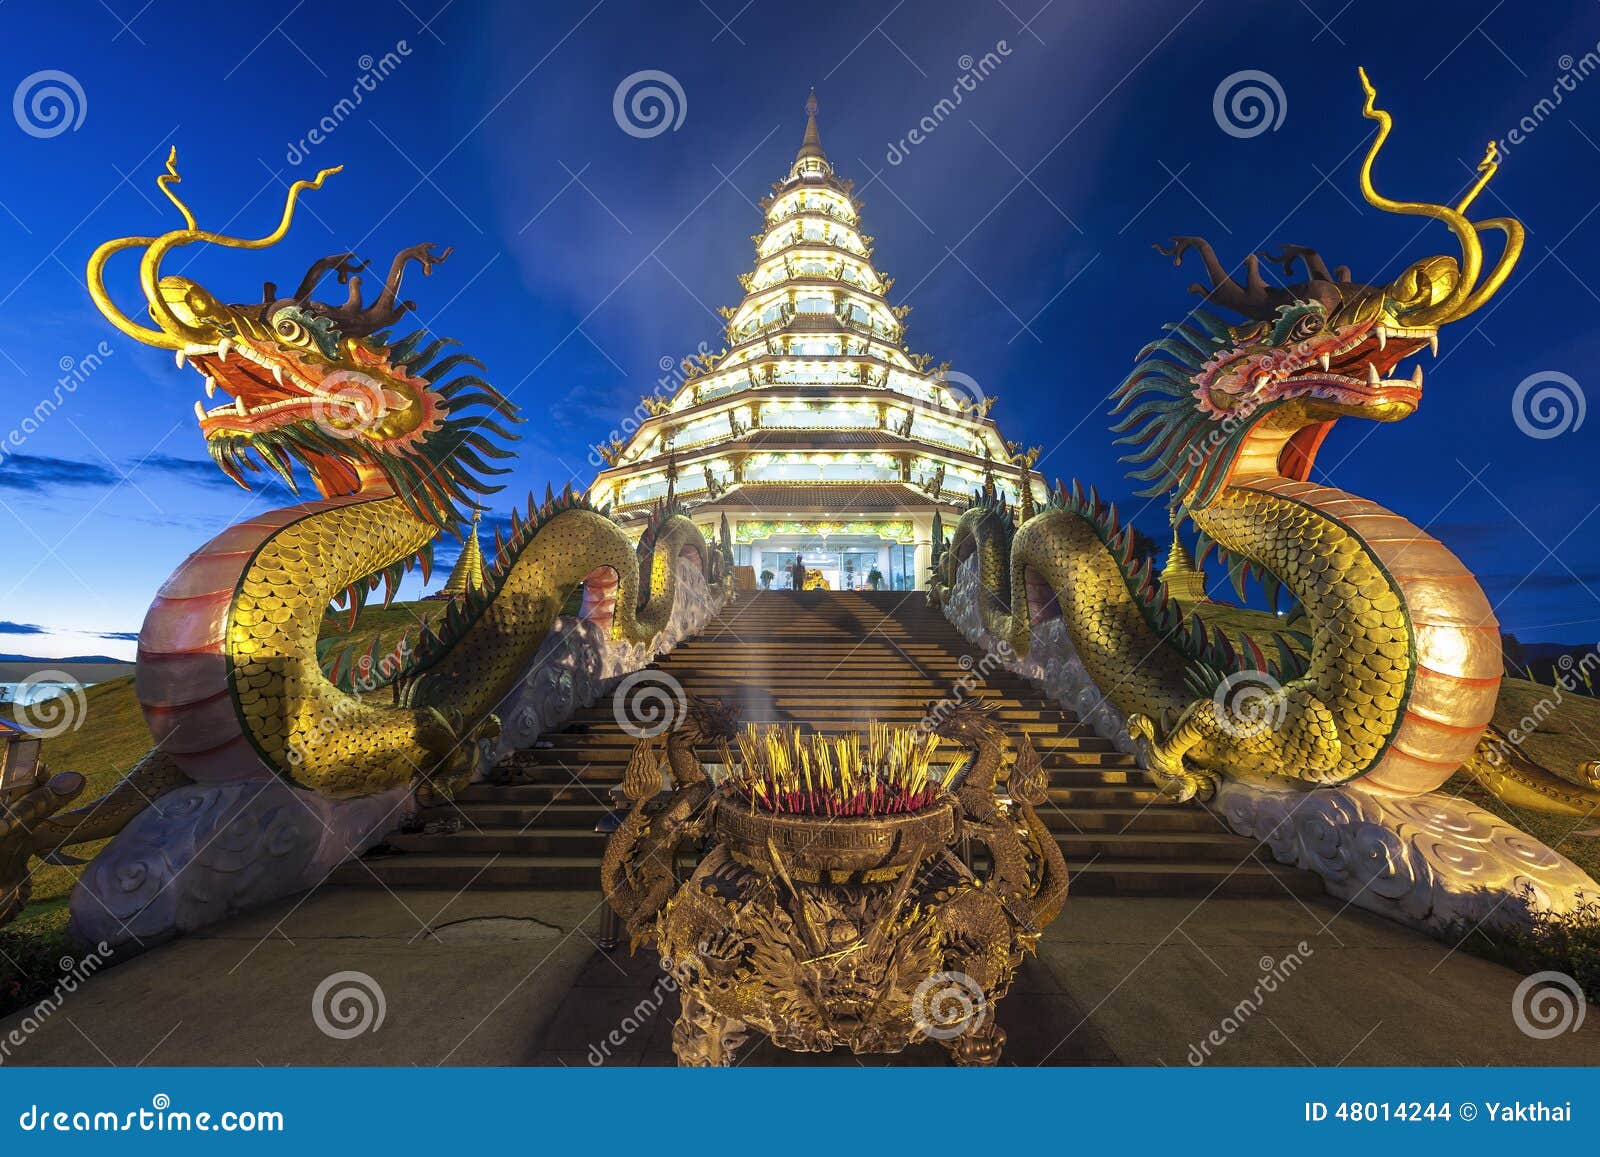 temple in chiang rai province, thailand.